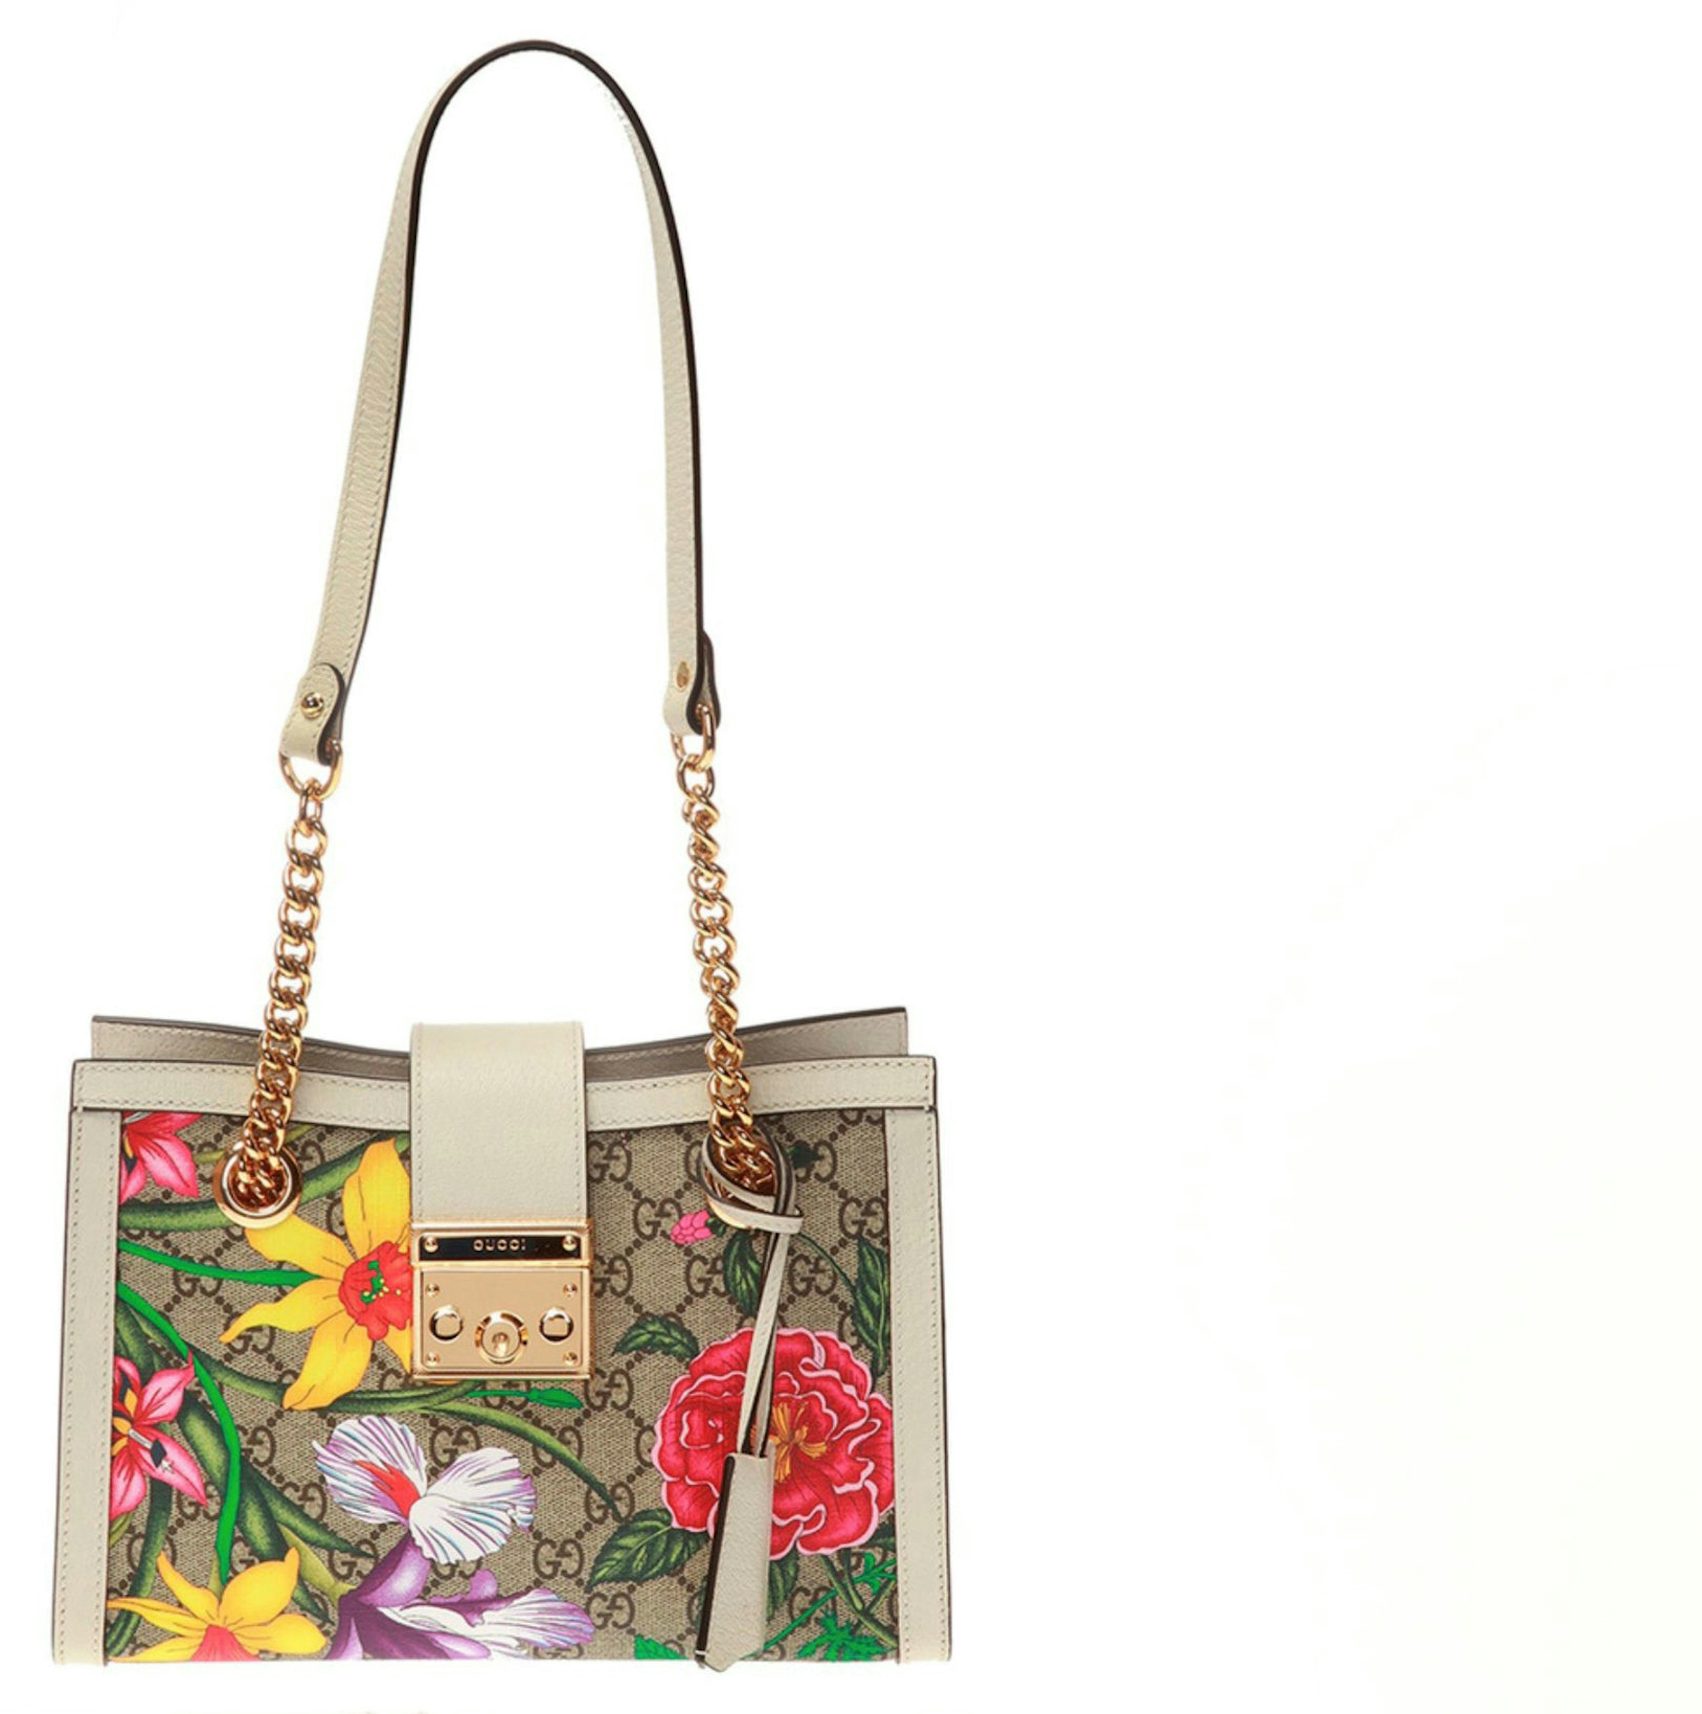 Gucci Nice Top Handle Bag in Flora Coated Canvas with Leather Trim